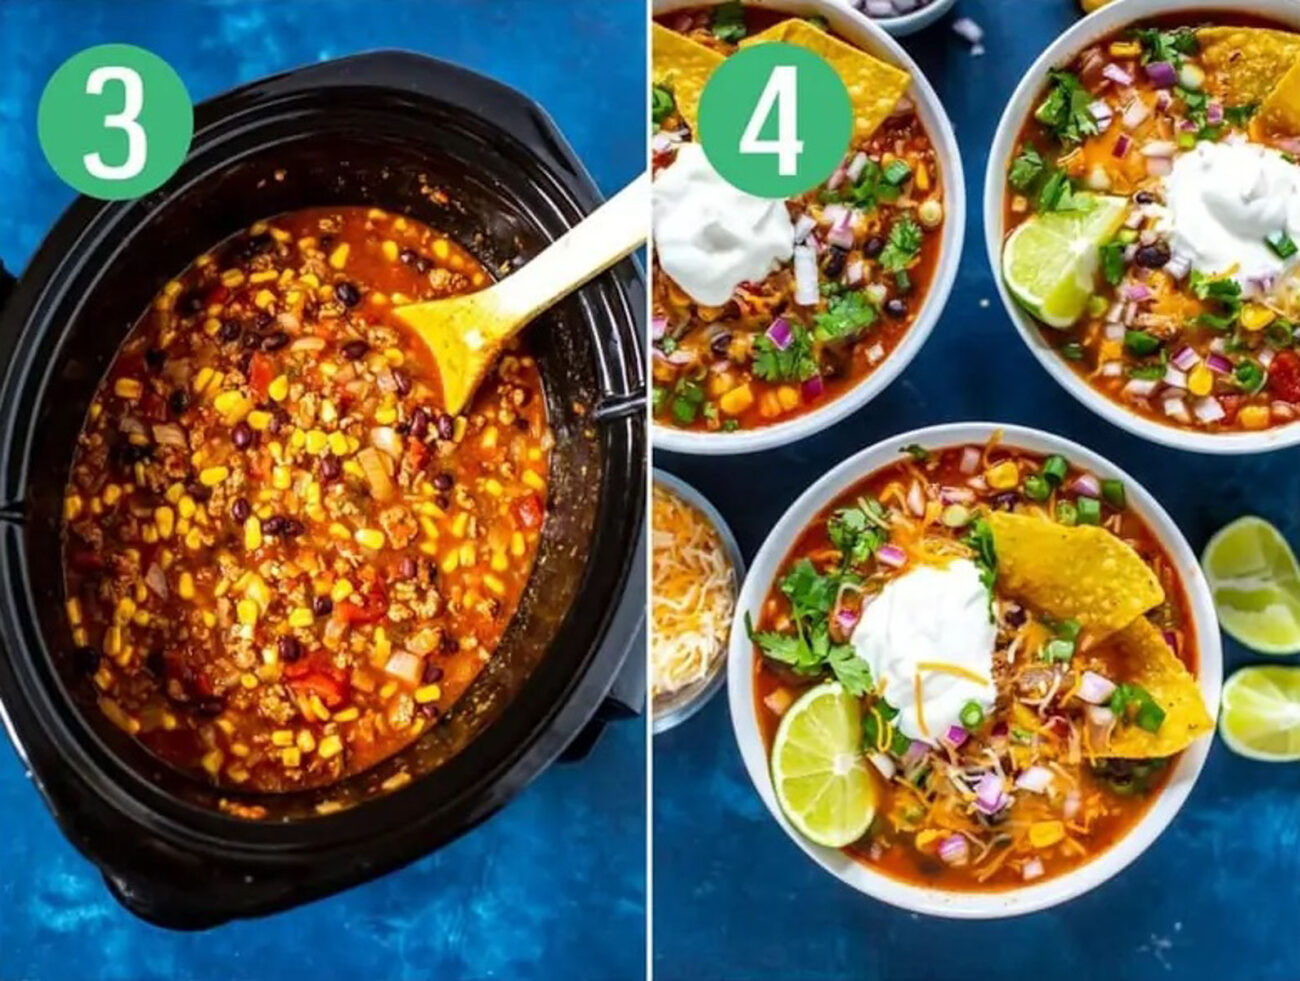 Steps 3 and 4 for making crockpot taco soup: Cook then serve.